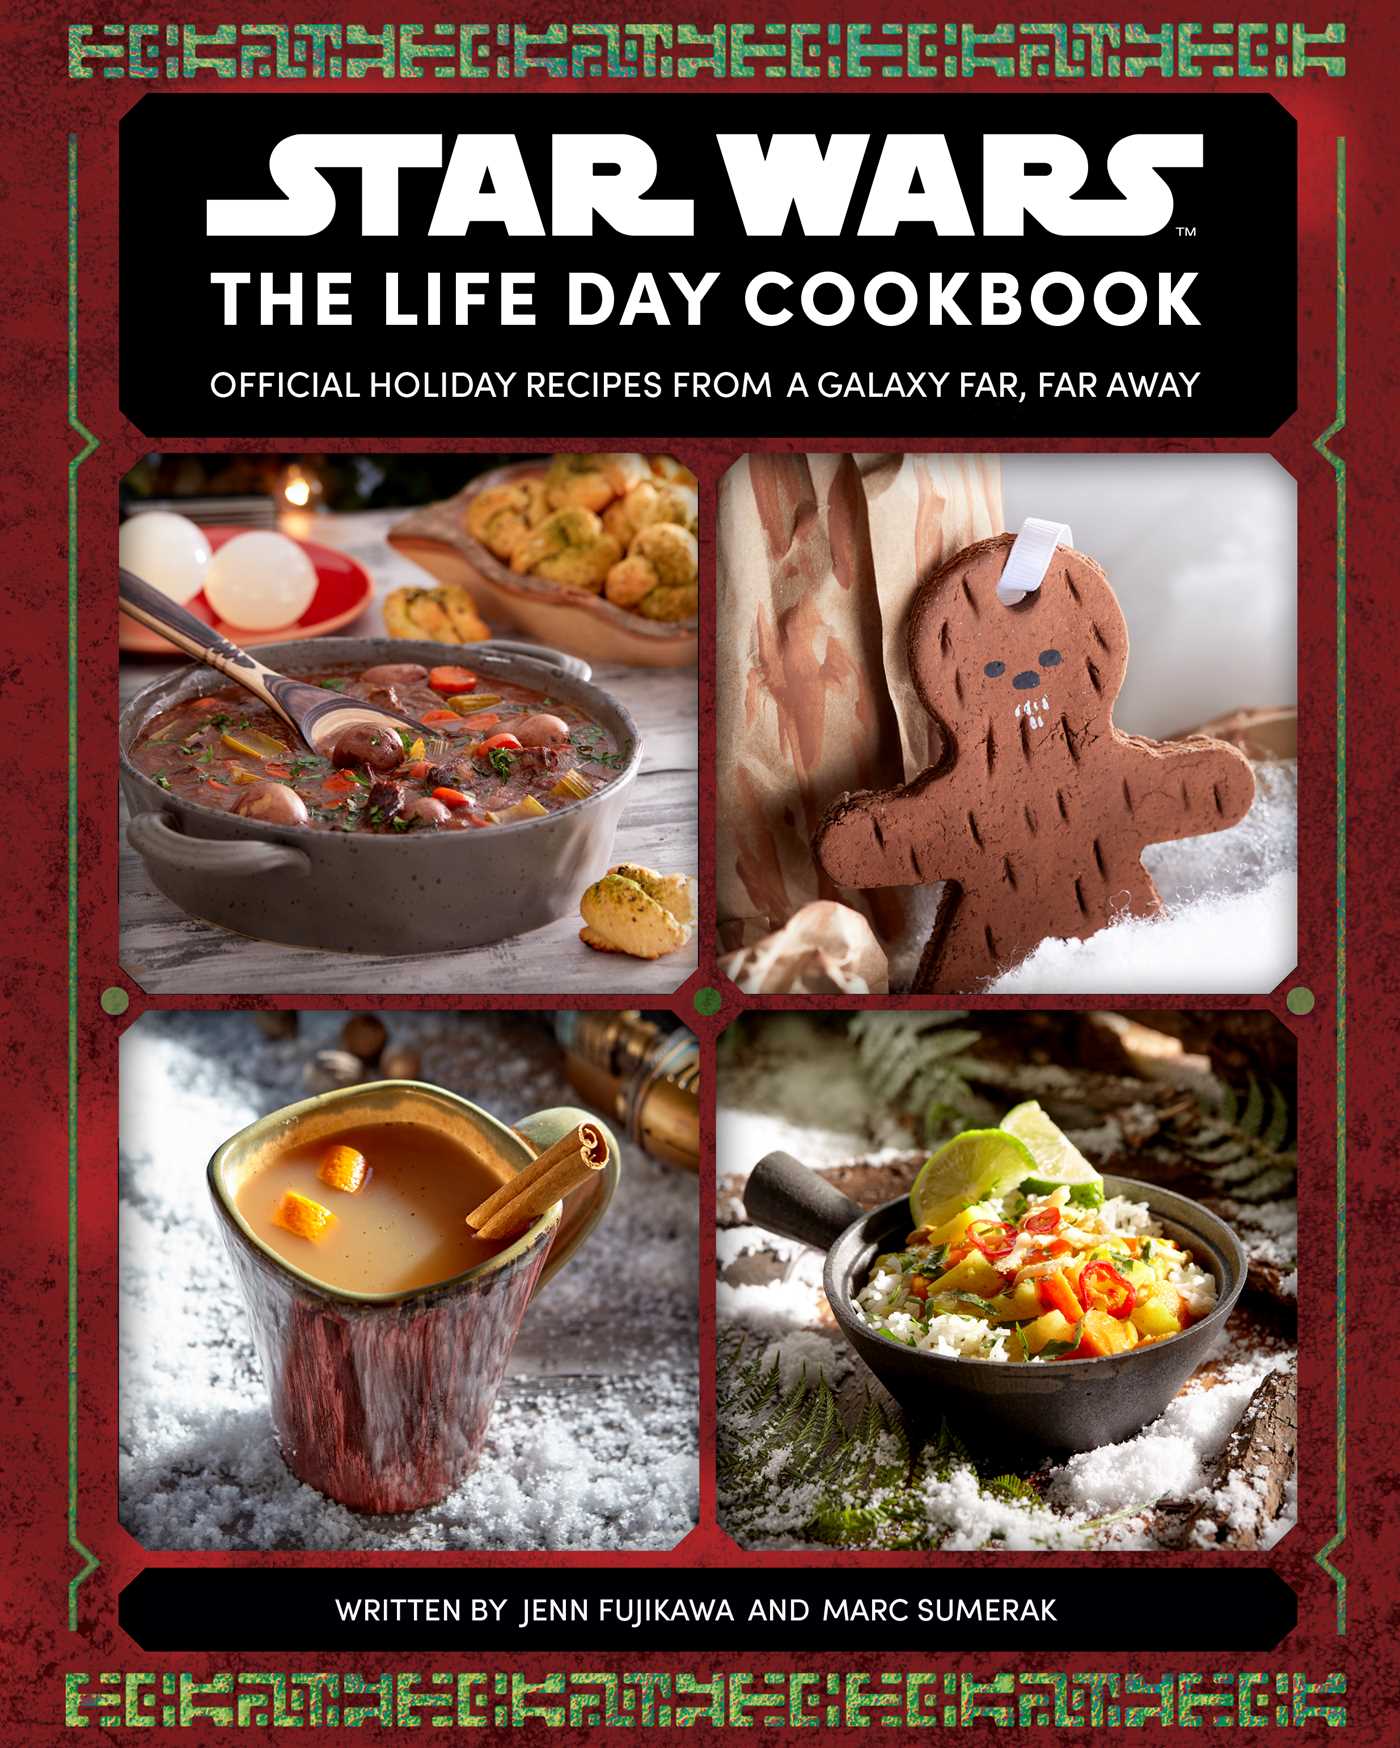 https://static.wikia.nocookie.net/starwars/images/f/fd/Star_Wars_The_Life_Day_Cookbook_cover.jpg/revision/latest?cb=20210717082351